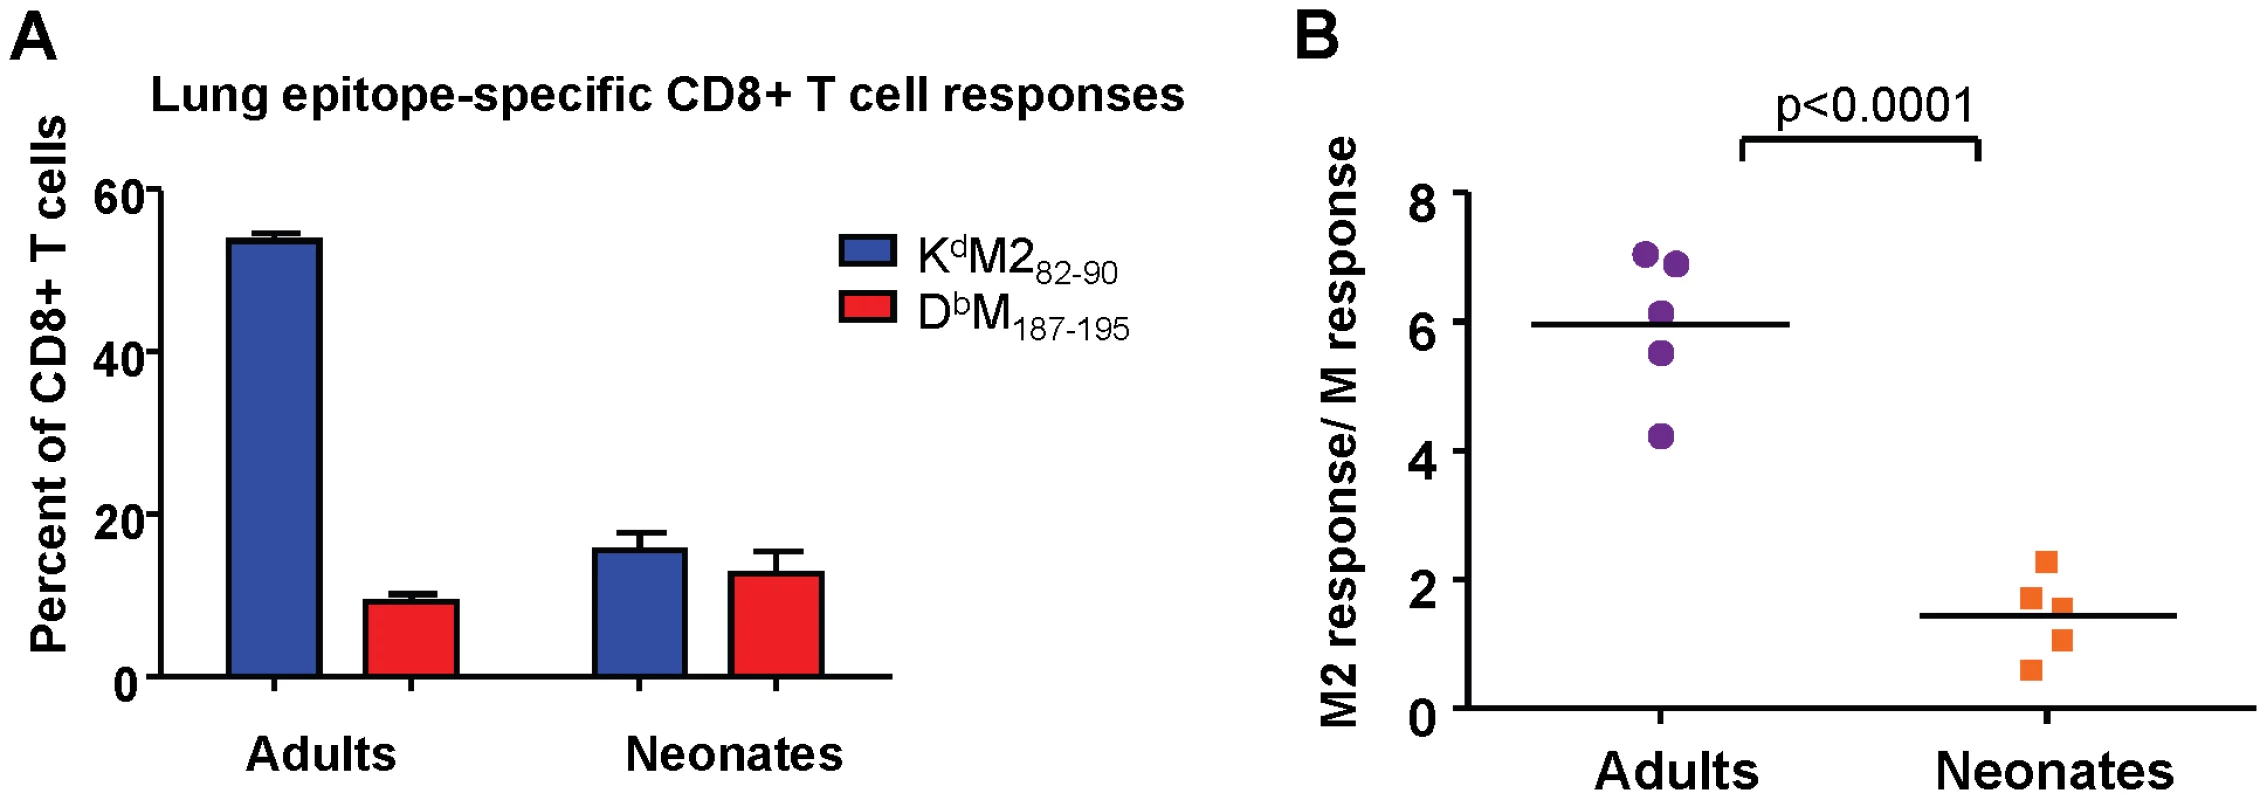 Epitope-specific CD8+ T cell responses following infection with rAd5-MM2.